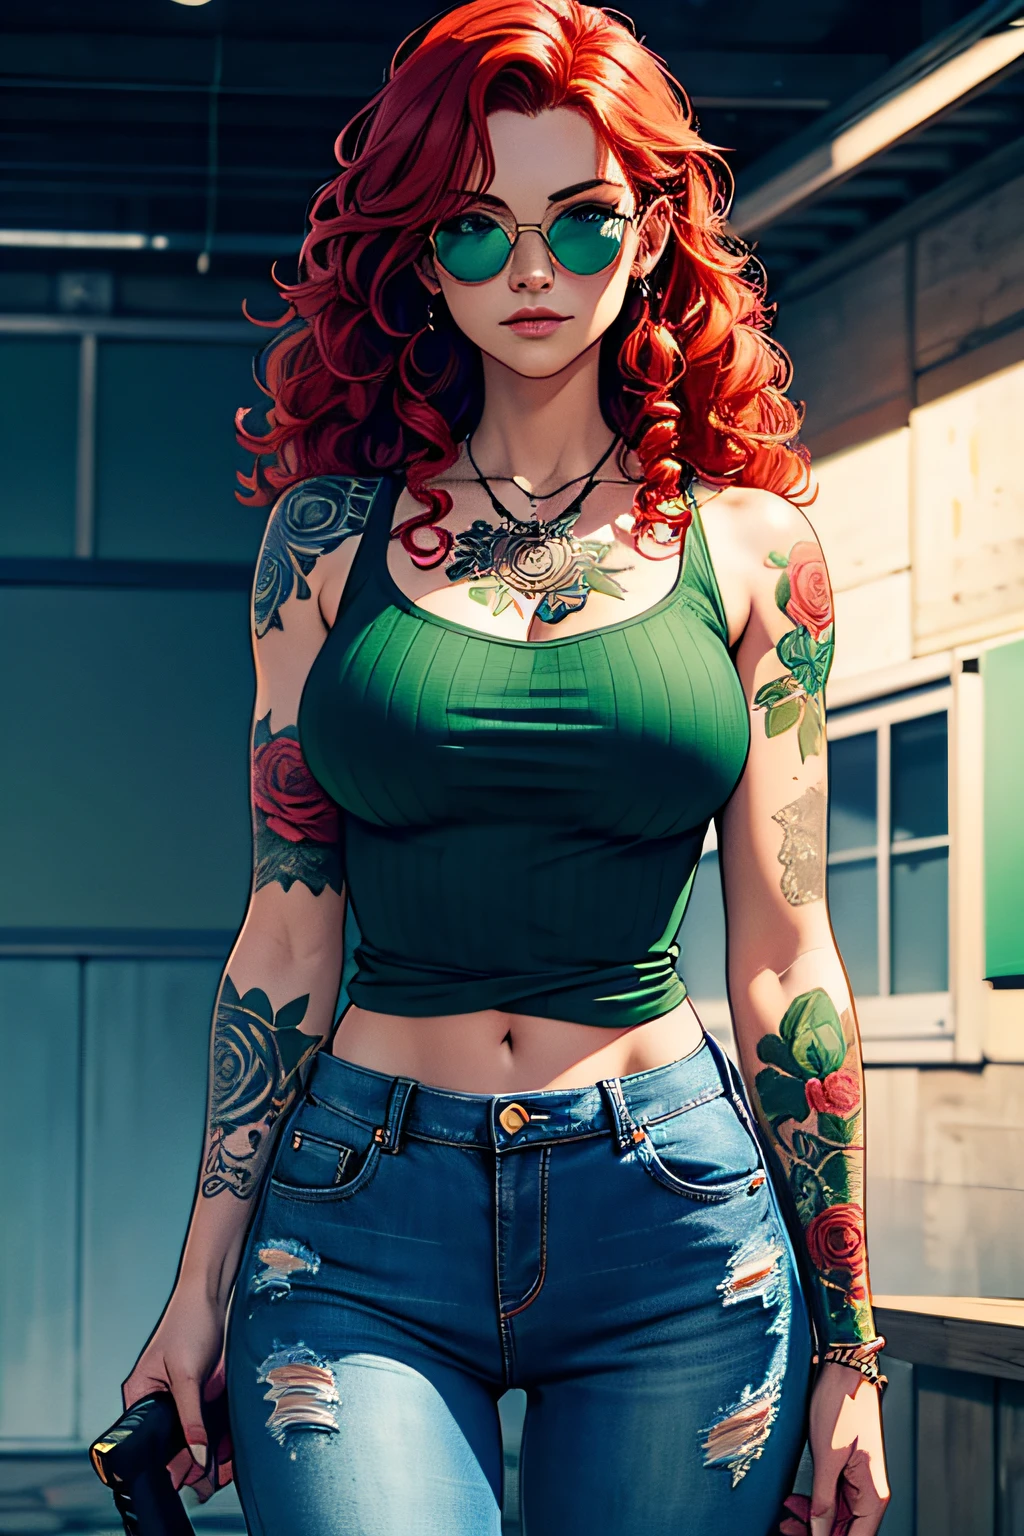 Red Head Girl with curly hair and tattoos of roses in shoulders and forearms, wearing blue top and jeans, sunglasses, carrying a katana. She has one eye of each color: Green on The light, blue on The left. Witch/Celtic wearstyle, in Brazil. The scene should be in Cinematic's distinctive real life style, focusing on the characters' expressions, colors naturals and detailed textures characteristic of the animations.